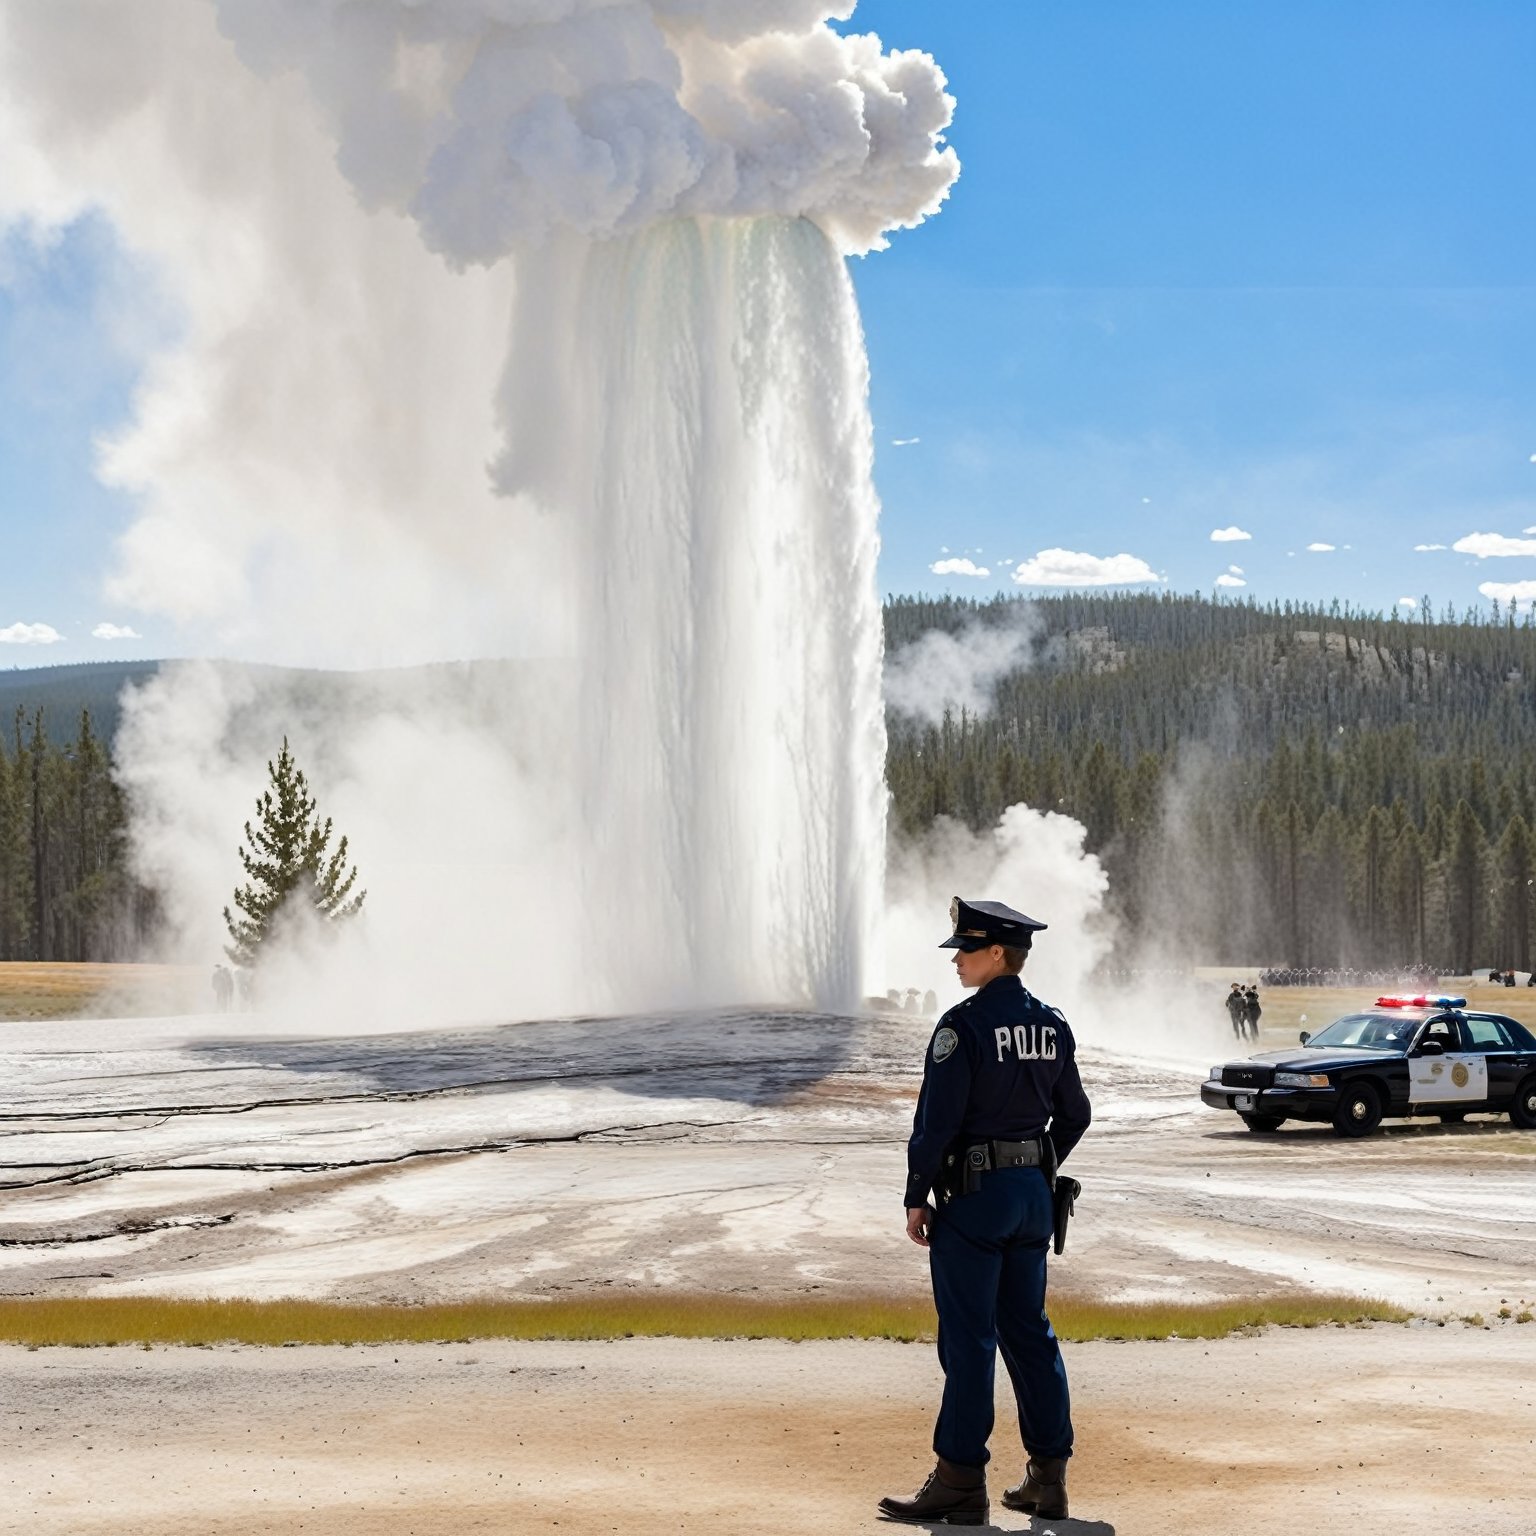 Hyper-Realistic photo of a beautiful LAPD police officer at  Yellowstone,20yo,1girl,solo,LAPD police uniform,cap,detailed exquisite face,soft shiny skin,smile,sunglasses,looking at viewer,Kristen Stewart lookalike,cap,fullbody:1.3
BREAK
backdrop:Old Faithful \(oldfa1thfu1\) in Yellowstone,outdoors,multiple boys,sky, day,tree,scenery,6+boys,realistic,photo background,many people watching smoke eruption,highly realistic eruption,highly detailed soil,mostly white soil with some brown,police car,(girl focus:1.3),[cluttered maximalism]
BREAK
settings: (rule of thirds1.3),perfect composition,studio photo,trending on artstation,depth of perspective,(Masterpiece,Best quality,32k,UHD:1.4),(sharp focus,high contrast,HDR,hyper-detailed,intricate details,ultra-realistic,kodachrome 800:1.3),(cinematic lighting:1.3),(by Karol Bak$,Alessandro Pautasso$,Gustav Klimt$ and Hayao Miyazaki$:1.3),art_booster,photo_b00ster, real_booster,Ye11owst0ne